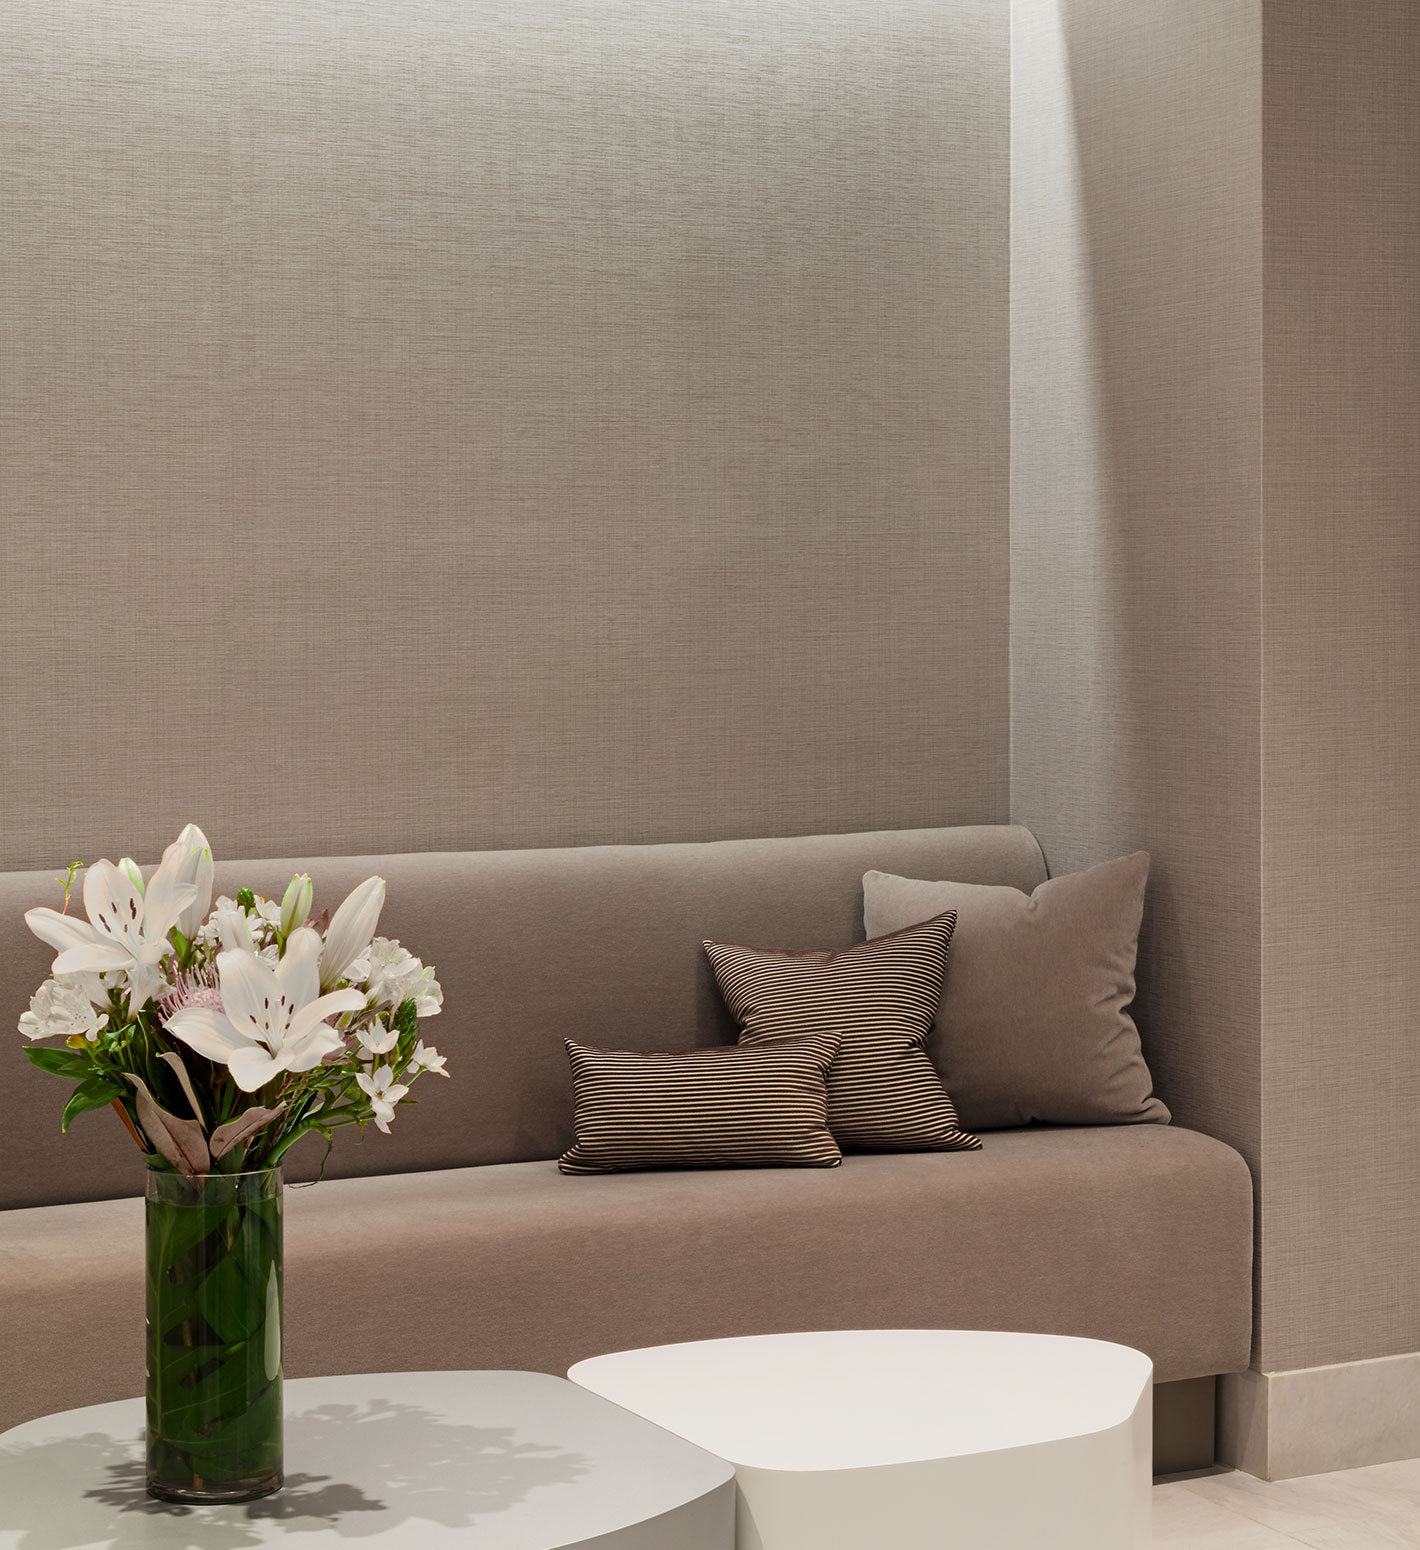 A modern taupe-colored banquette in the lobby of 1056 5th Avenue